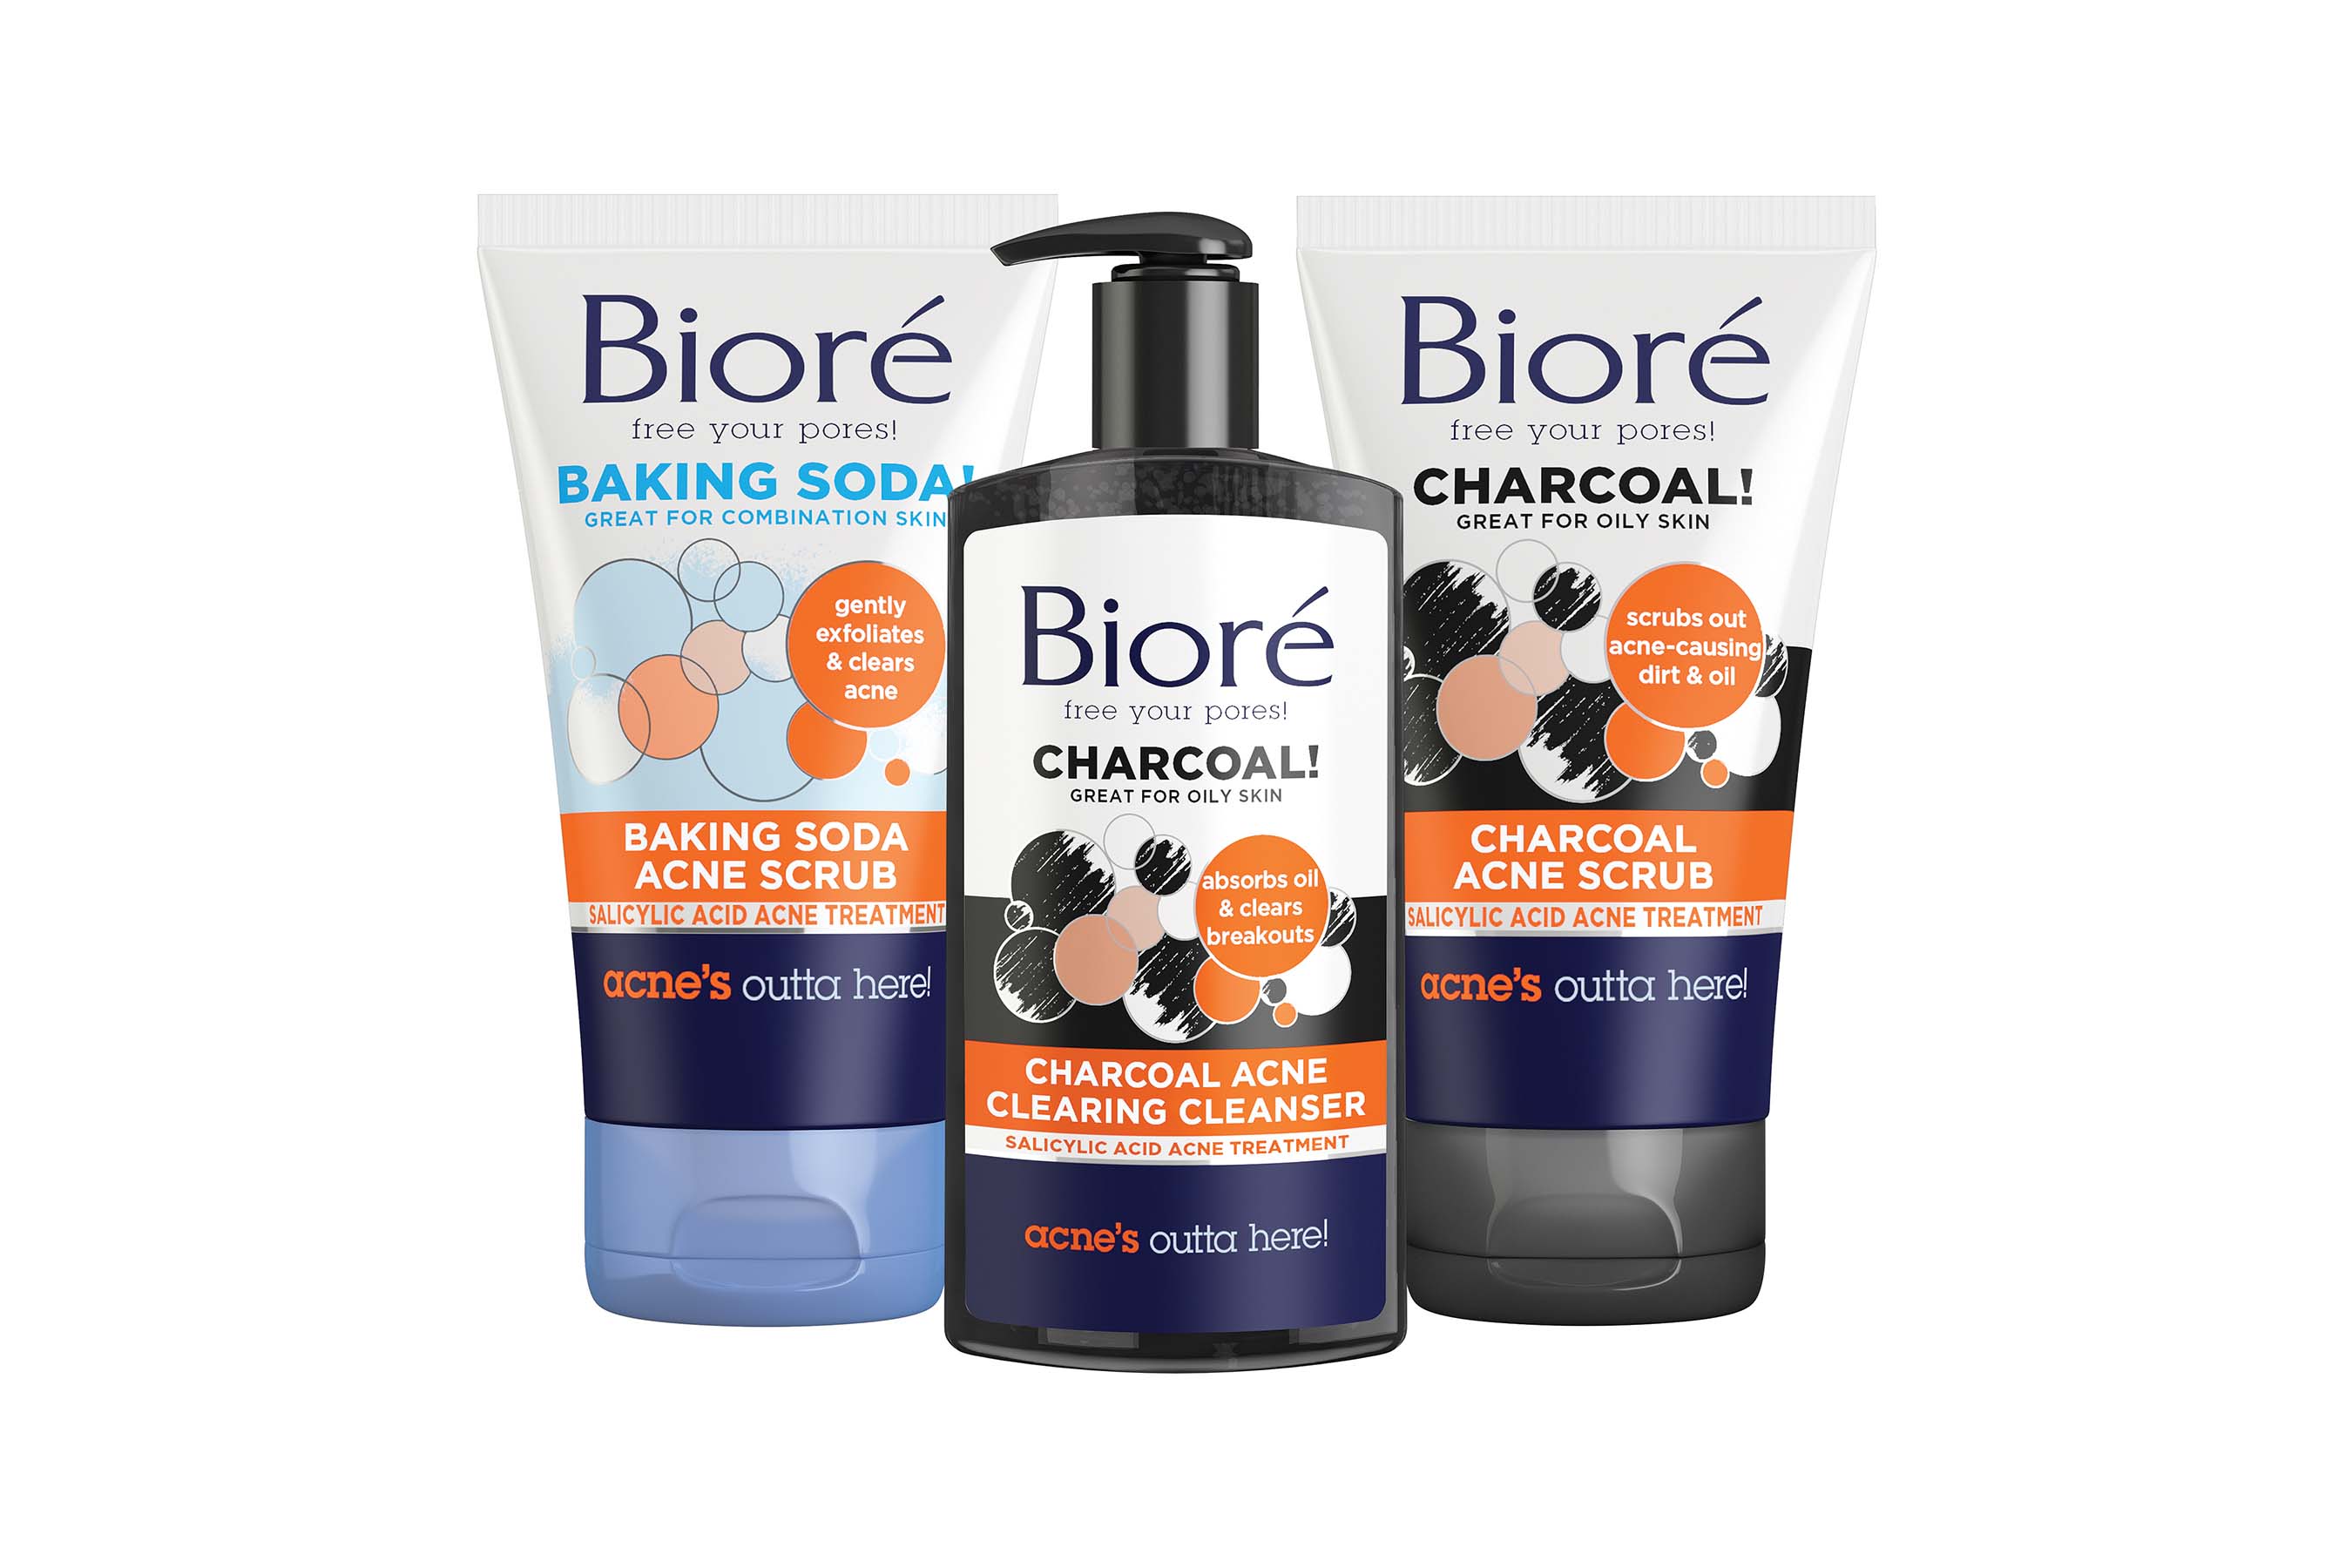 new-acne-products-from-biore-skincare-11-HR.jpg